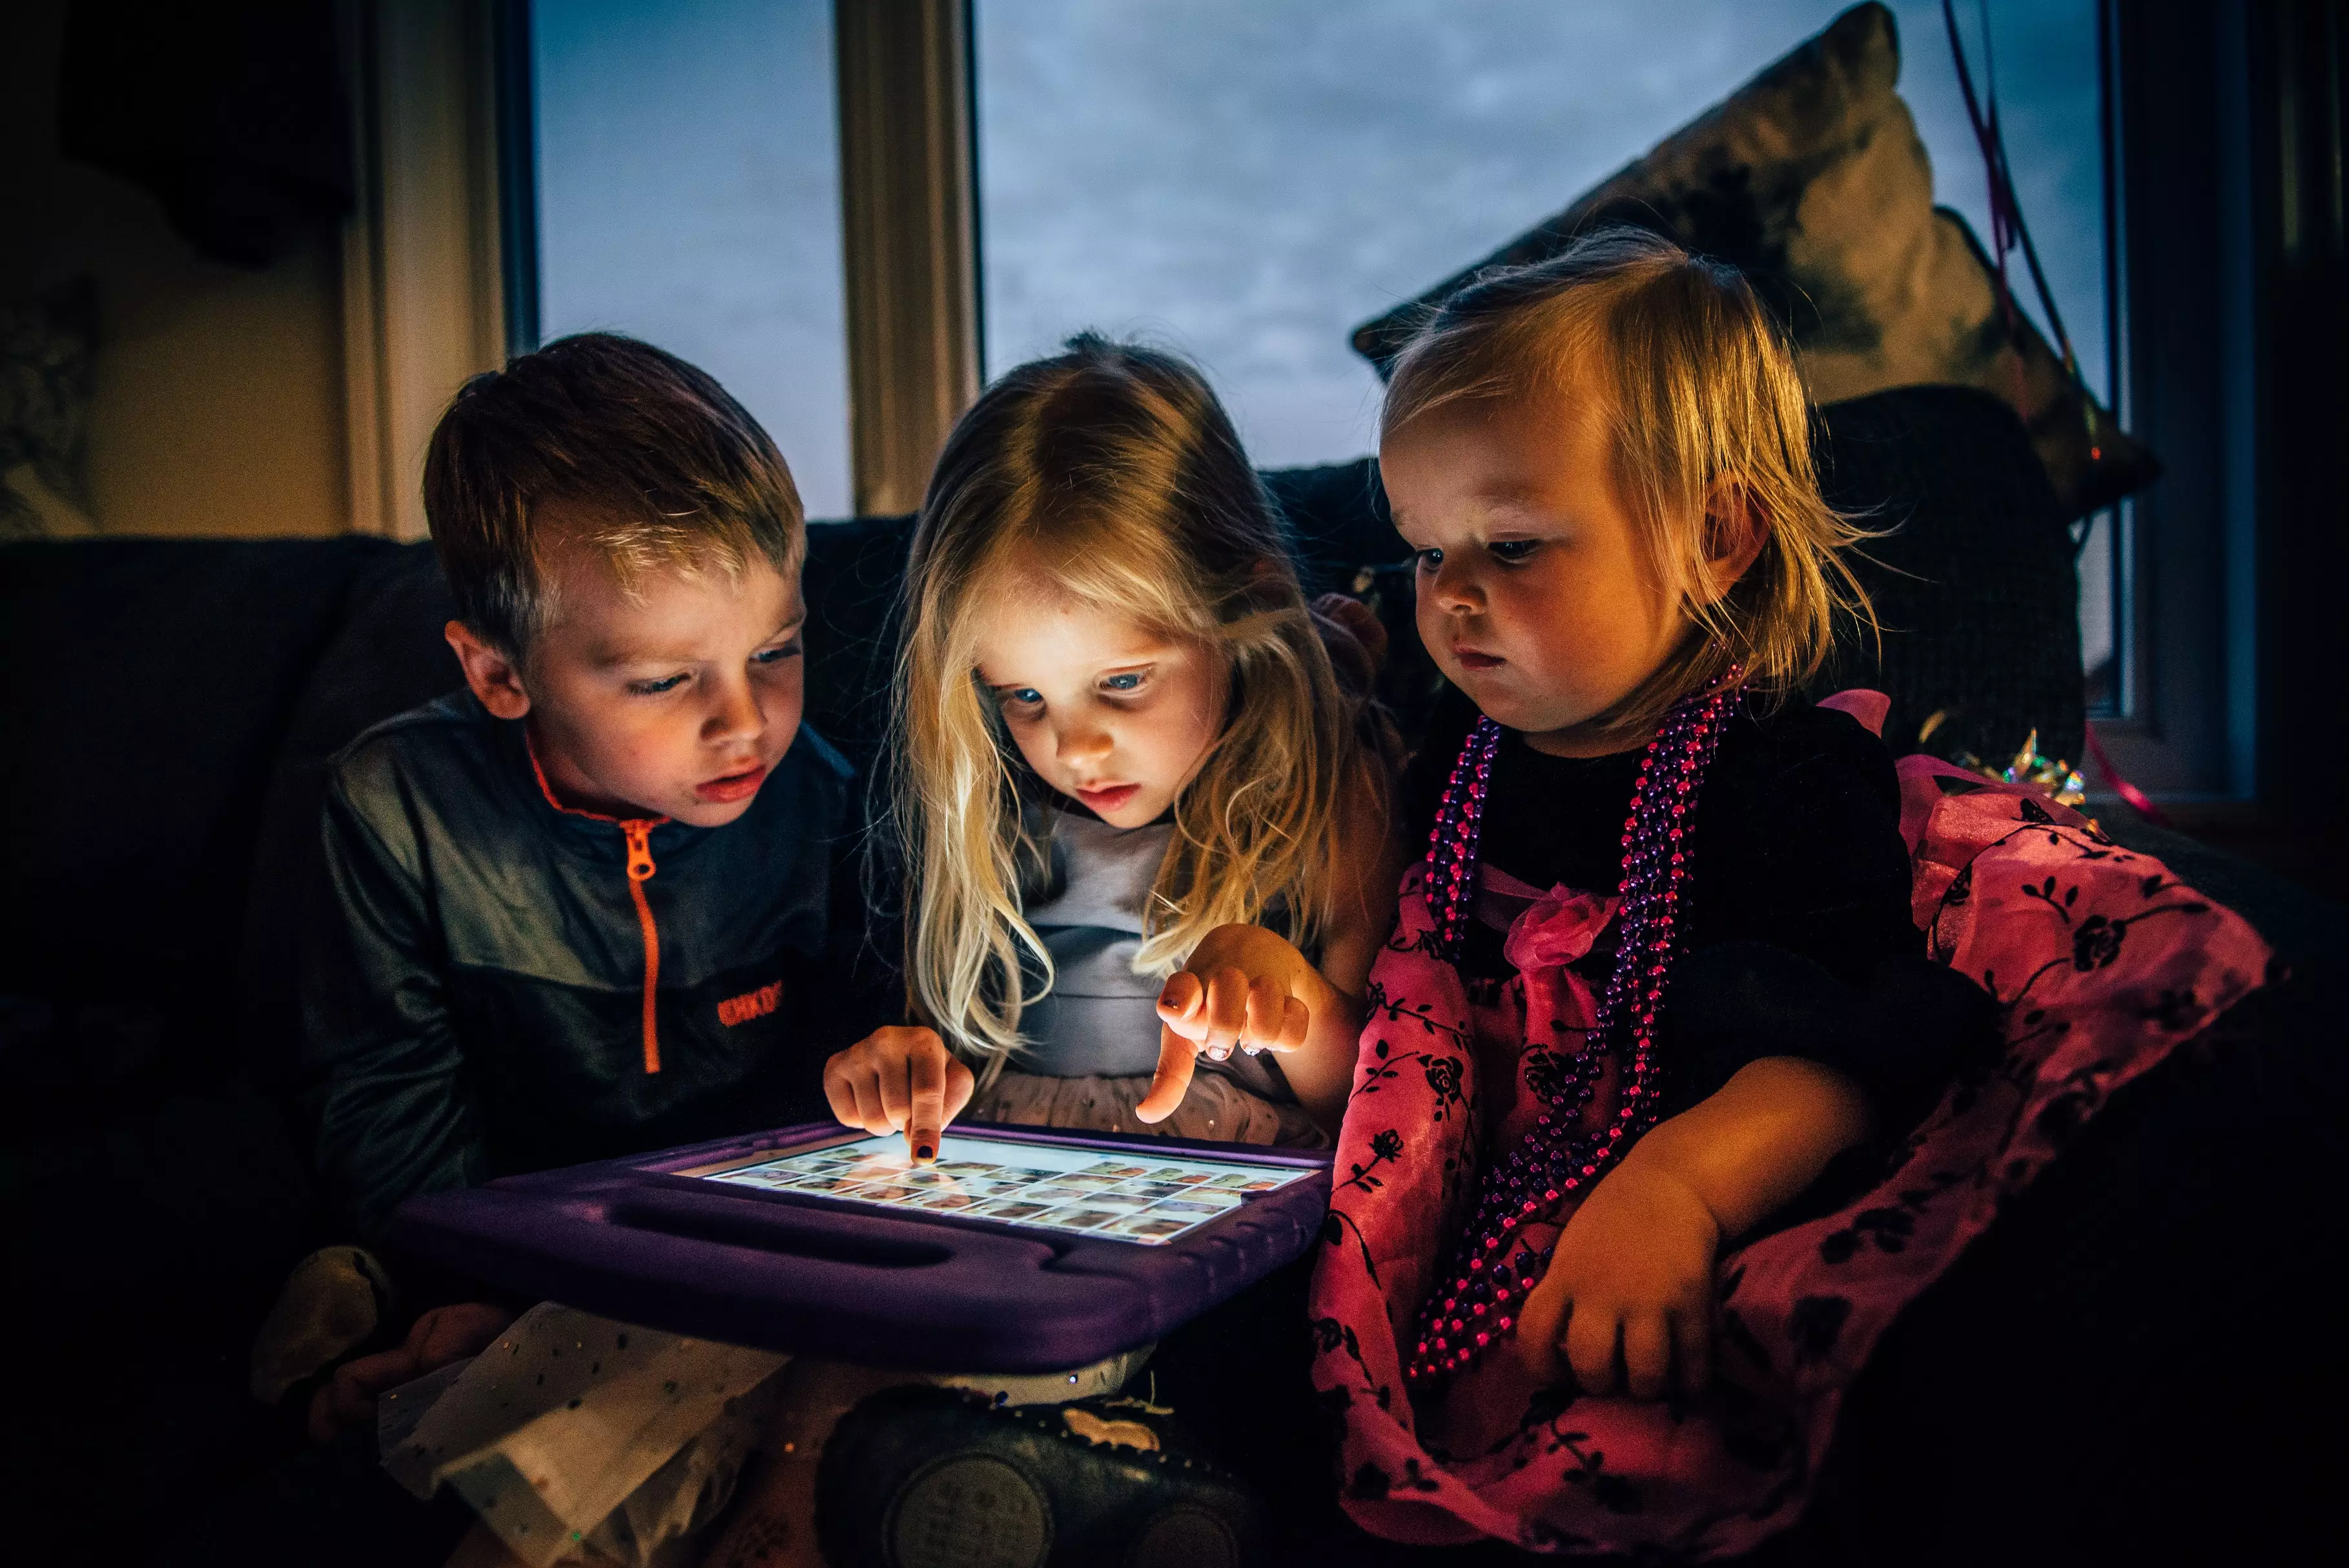 Some 28 per cent of parents said they found their kids playing on a device (